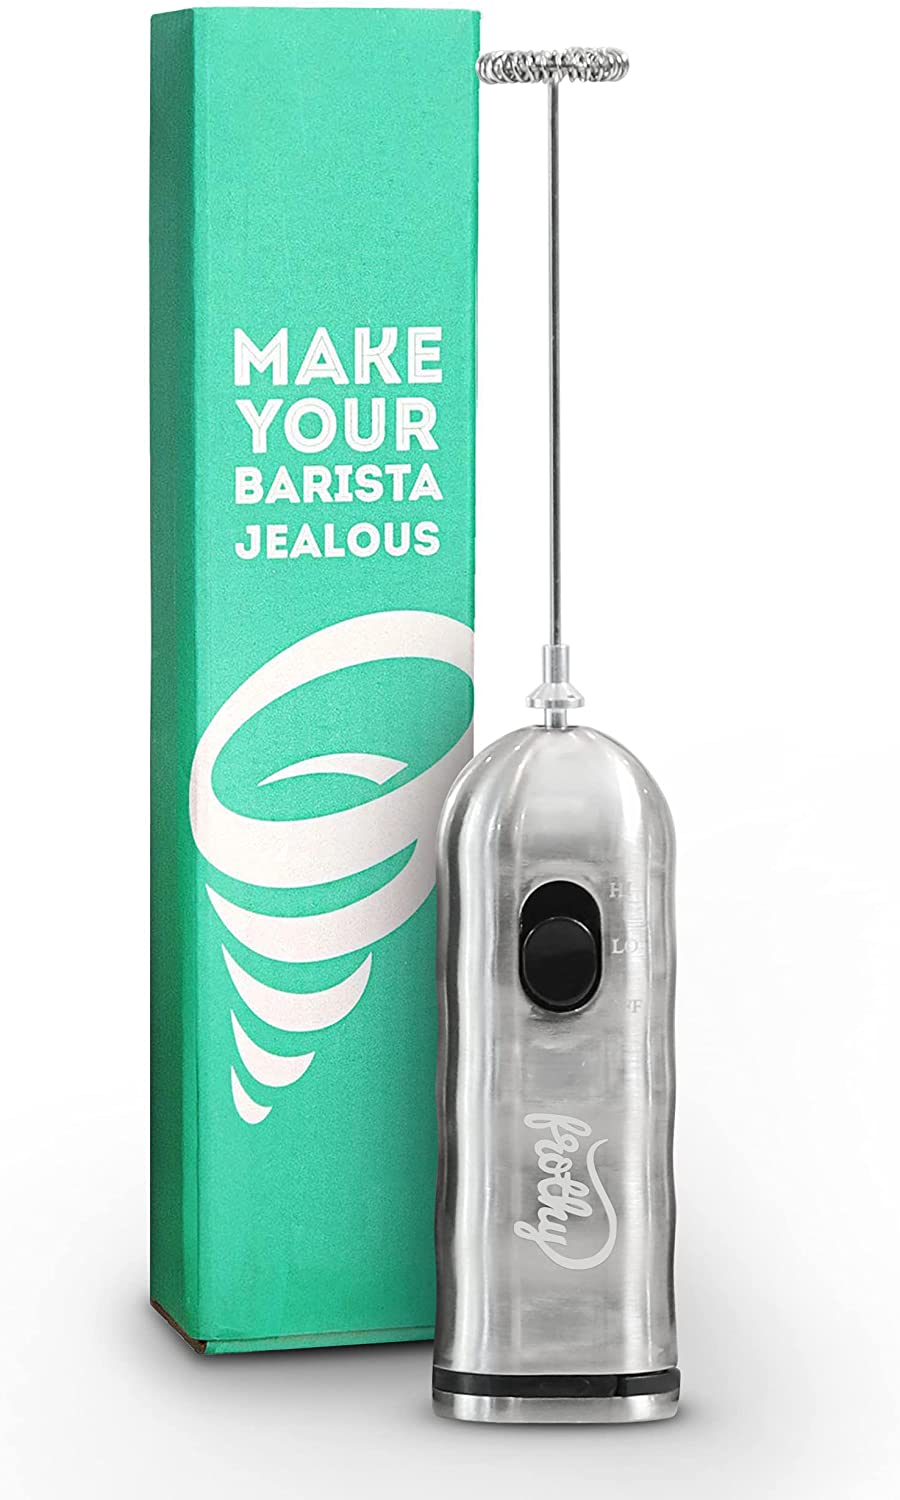 Cafe Casa Barista Milk Frother For Lattes